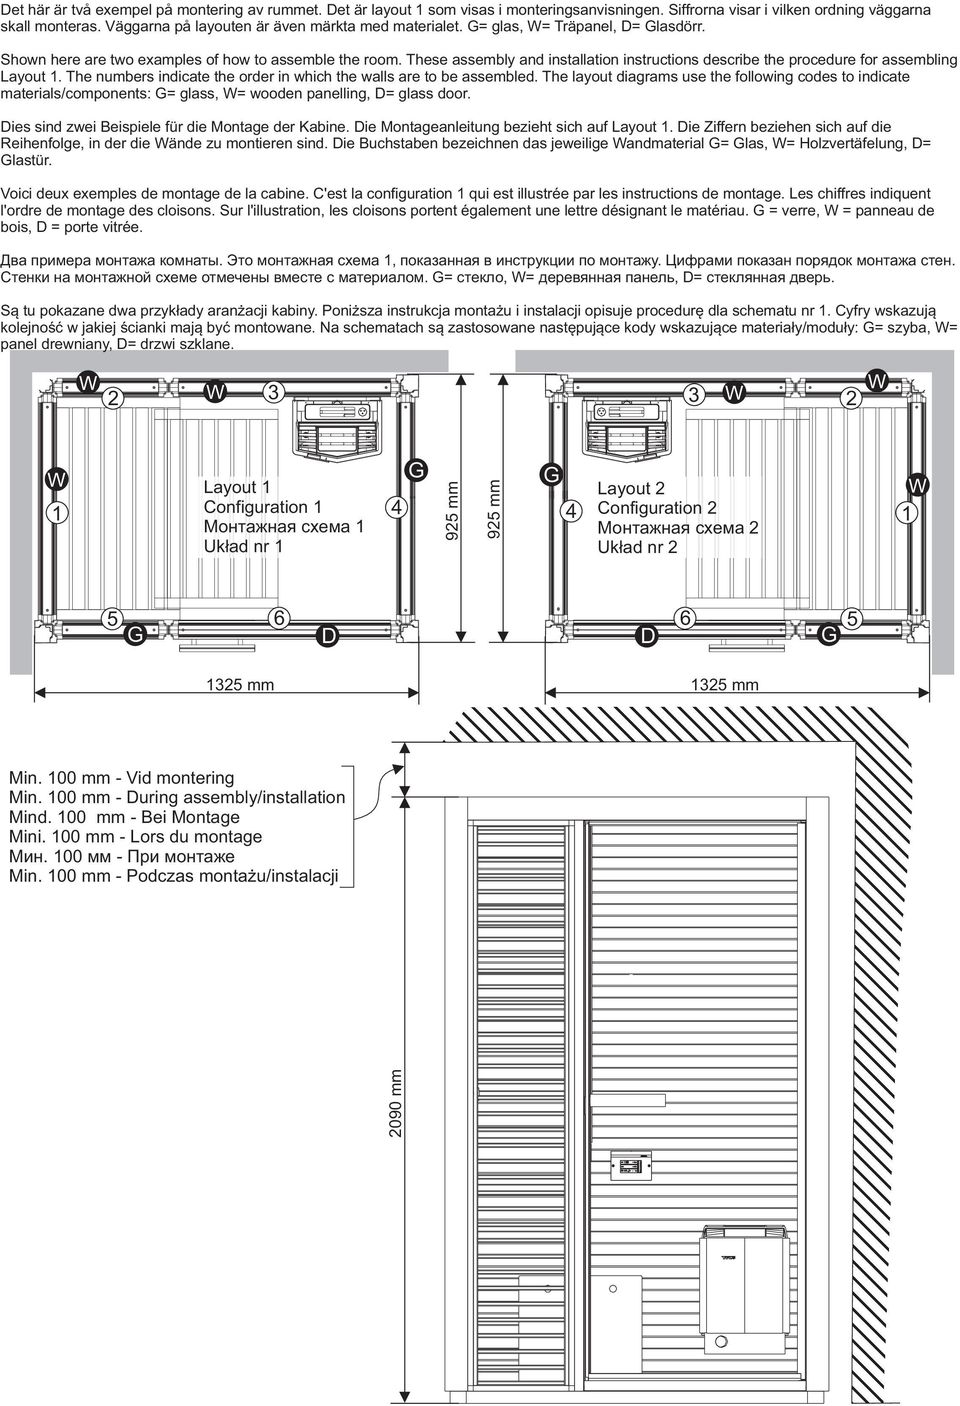 These assembly and installation instructions describe the procedure for assembling Layout 1. The numbers indicate the order in which the walls are to be assembled.